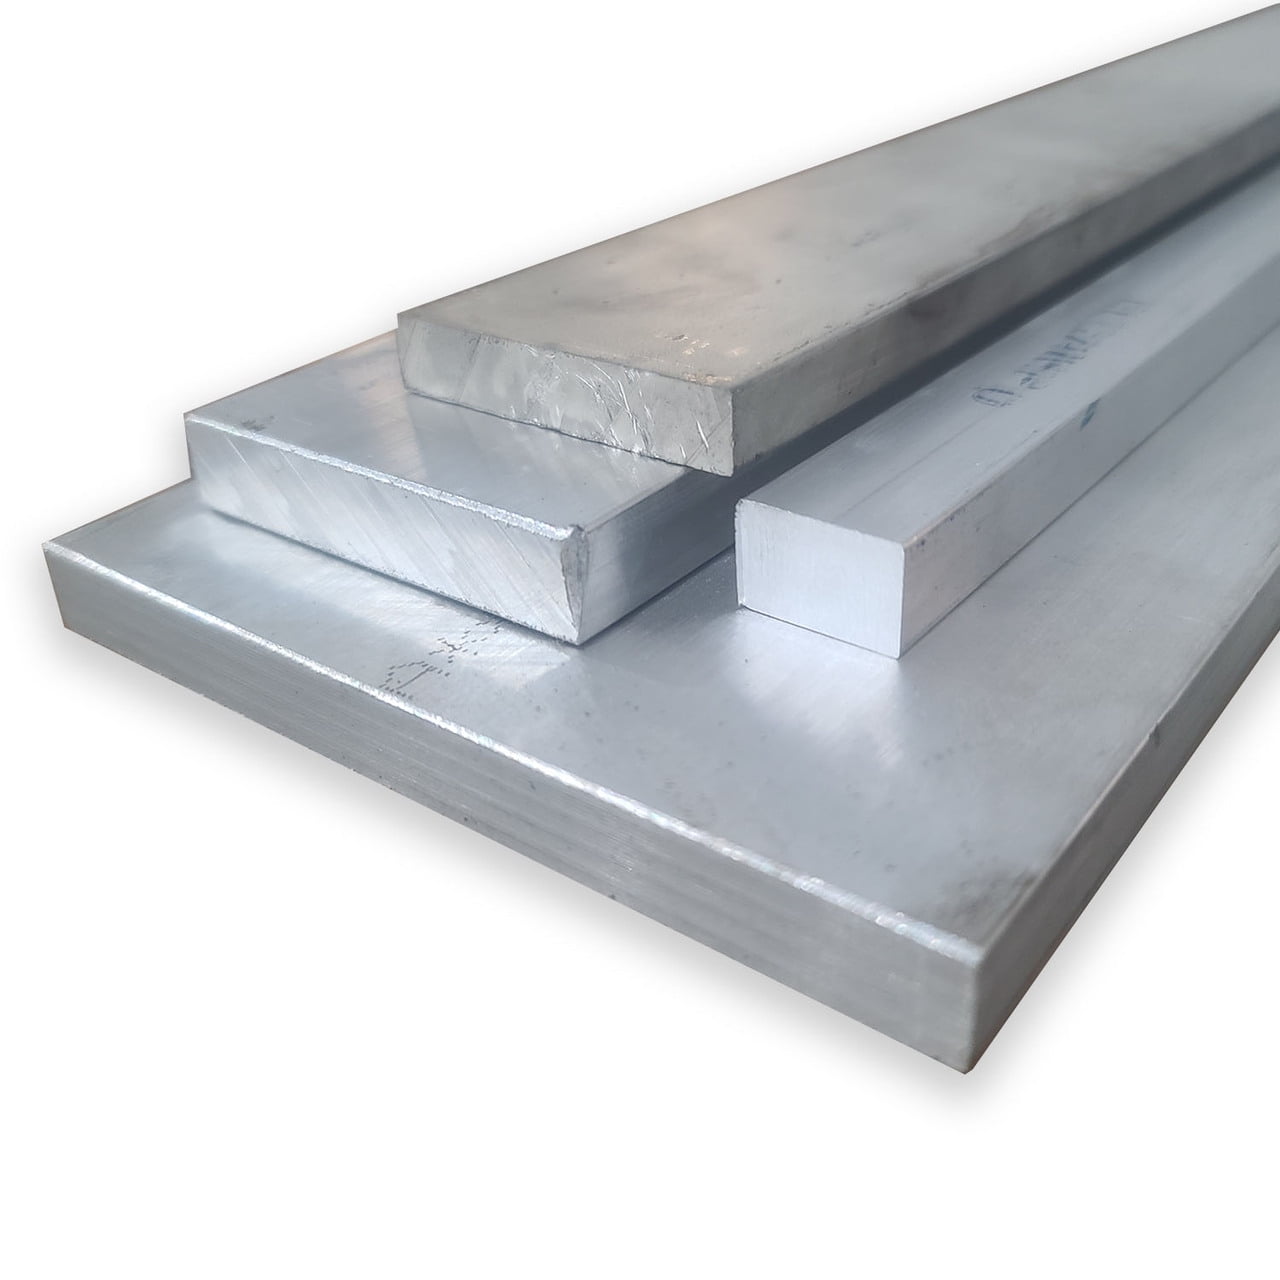 Finish Extruded ASTM B221 12 Length 4 Width 6061 Aluminum Rectangular Bar T6511 Temper Unpolished Mill 1/8 Thickness